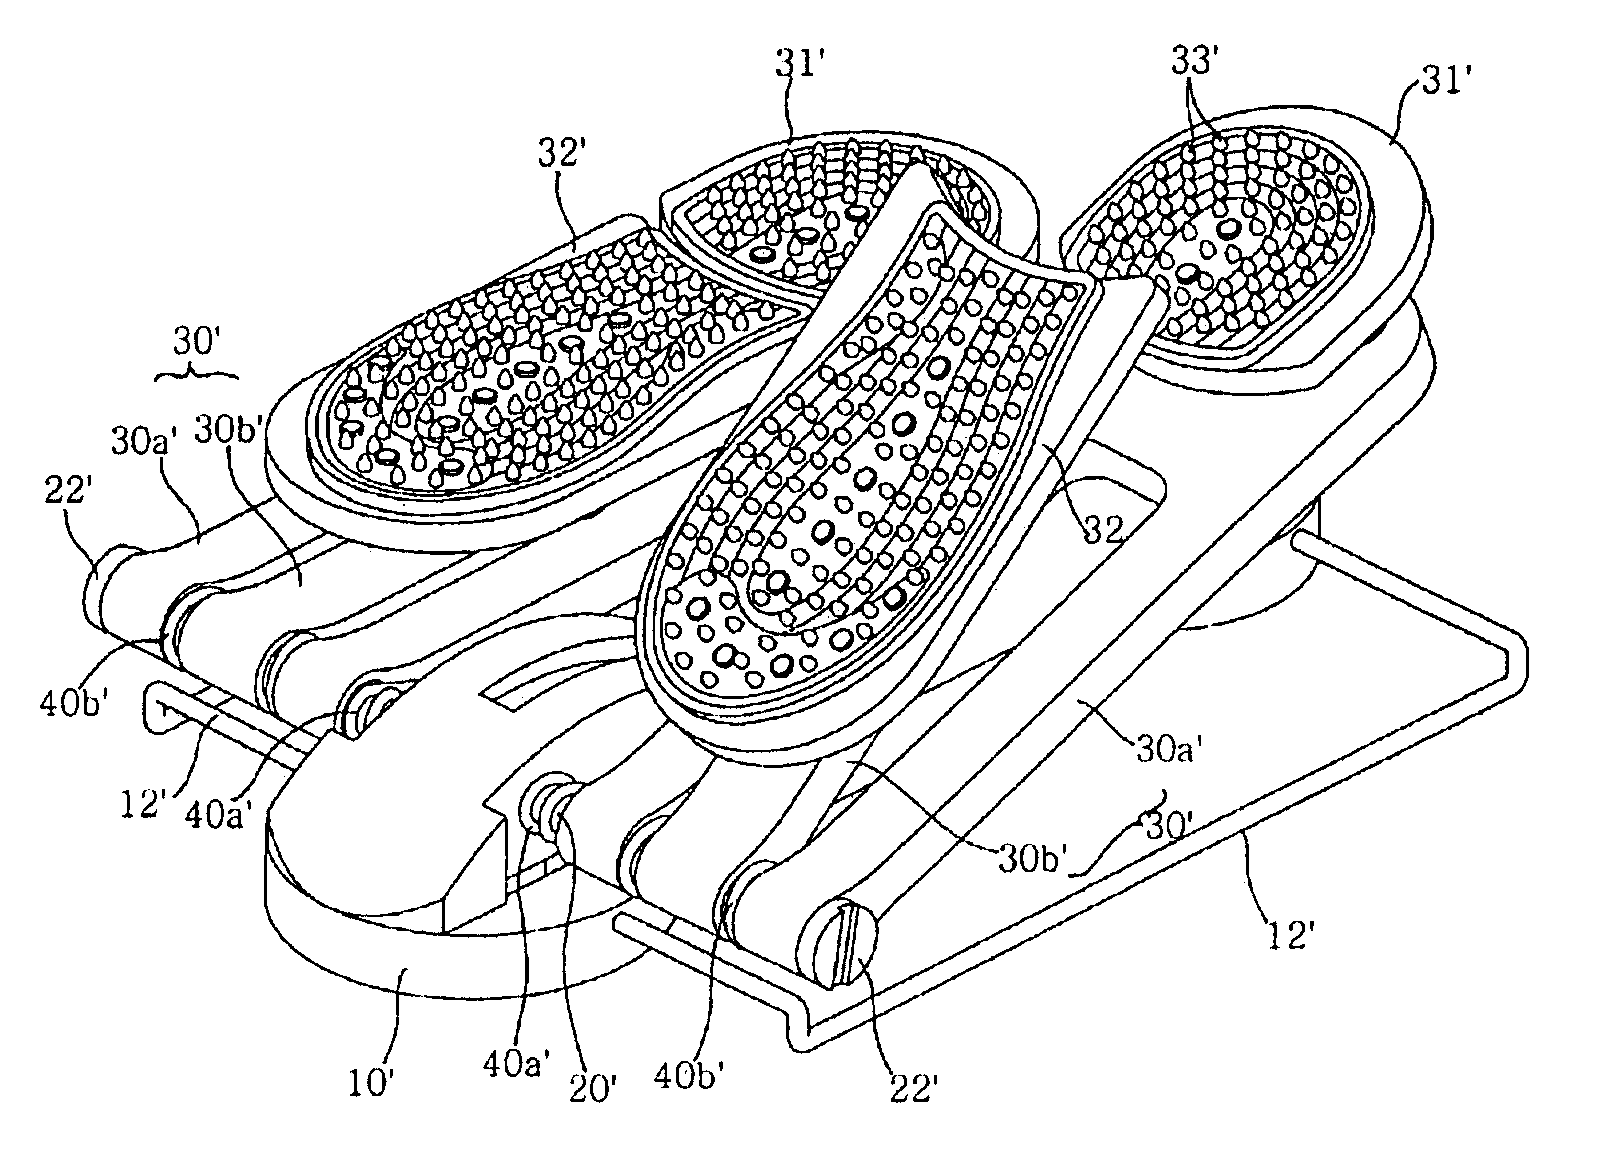 Exerciseing device for lower-body